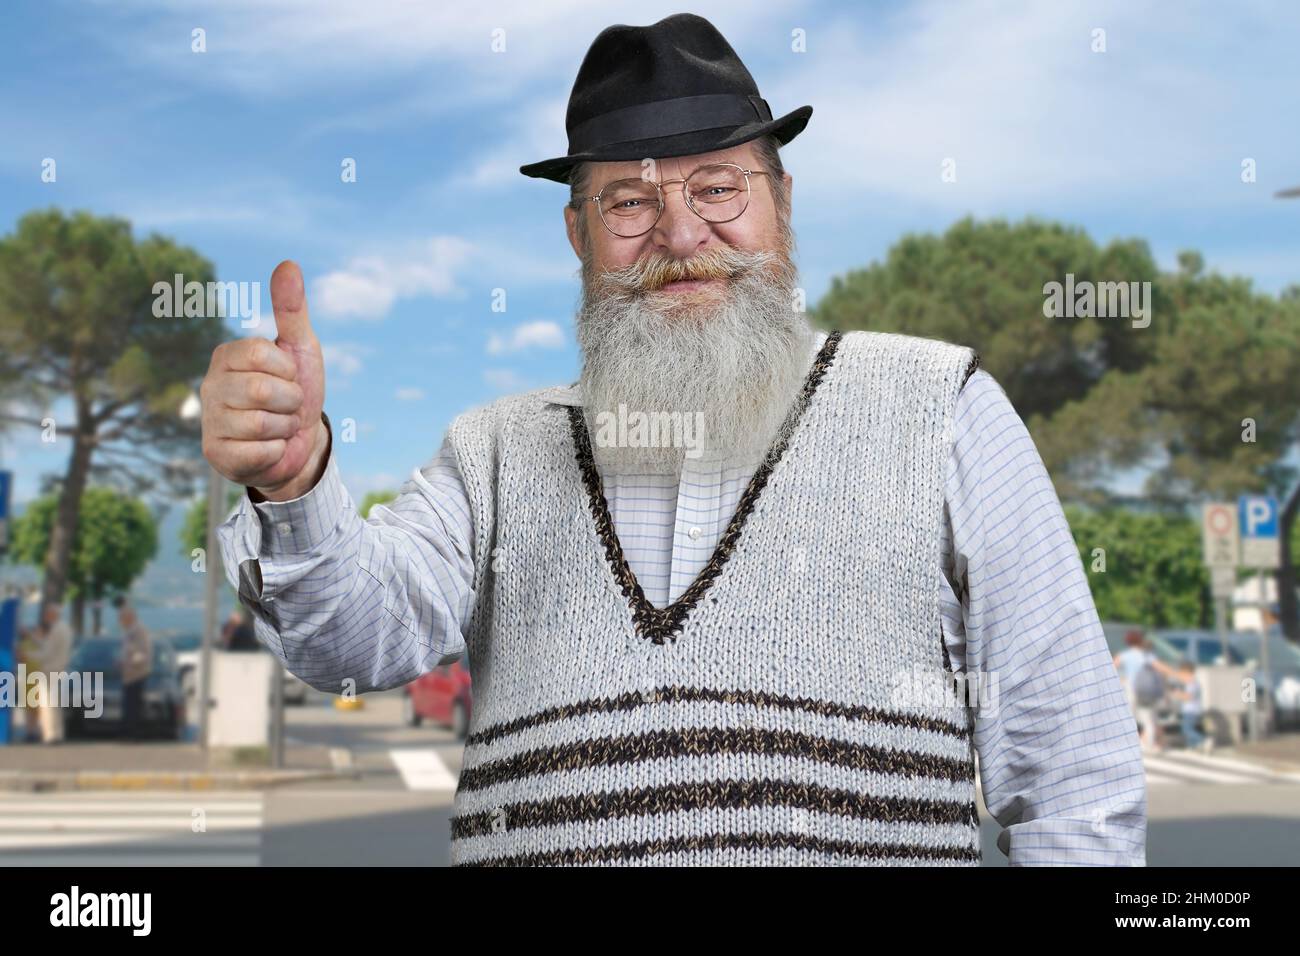 Old bearded man showing thumb up standing outdoors. Happy grandfather looking at camera and gesturing thumb up. Stock Photo